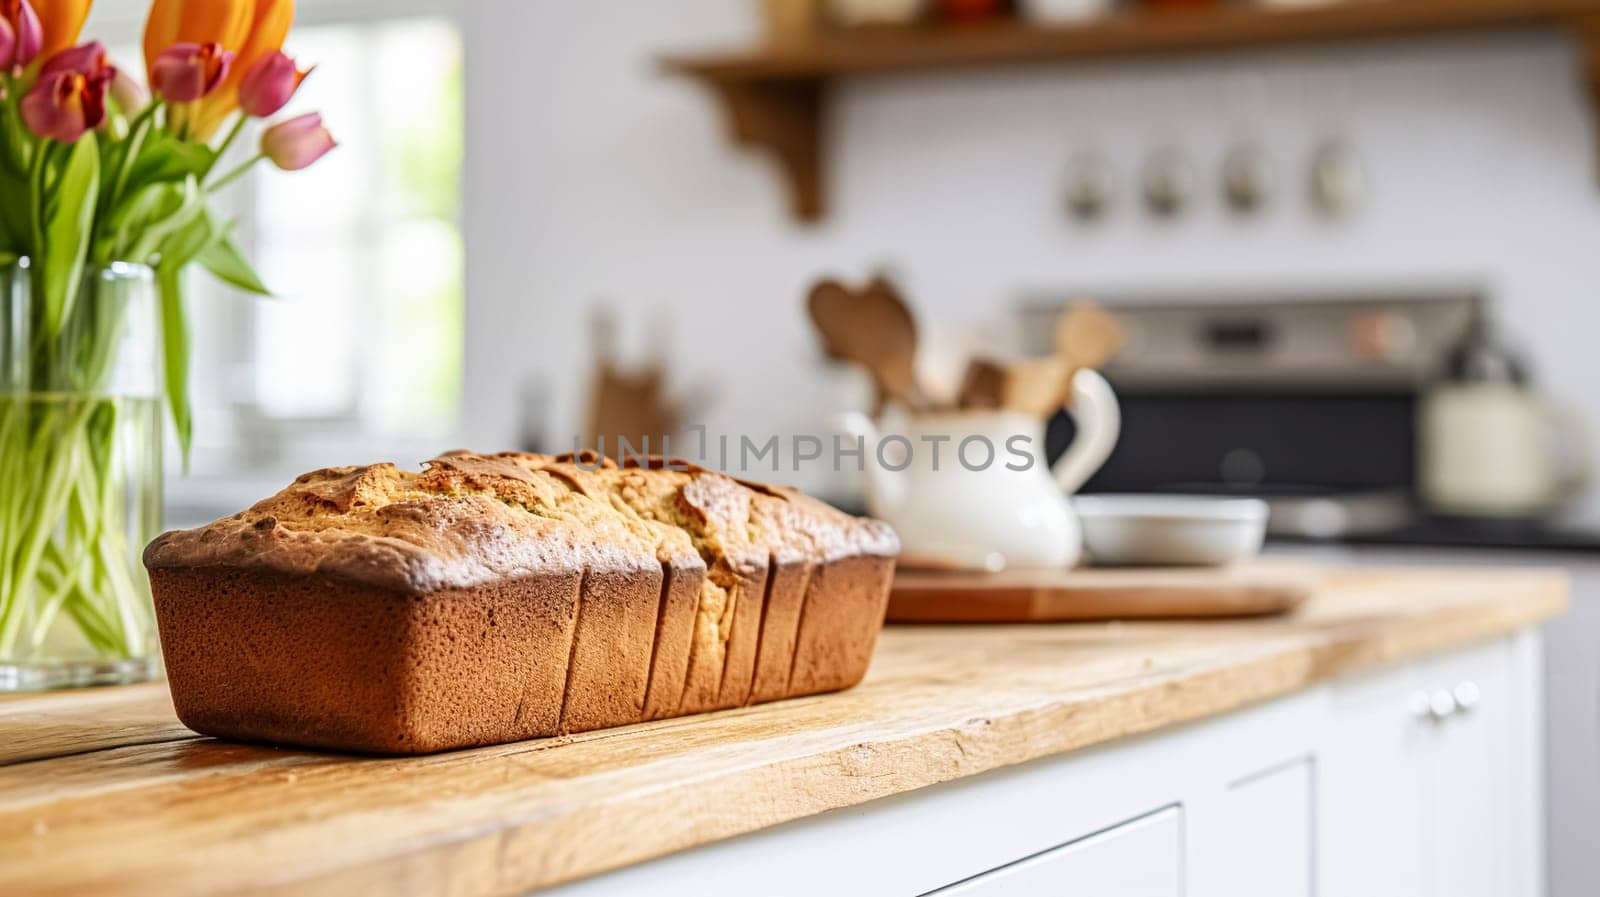 Banana bread in English country cottage, baking food and easy recipe idea for menu, food blog and cookbook by Anneleven